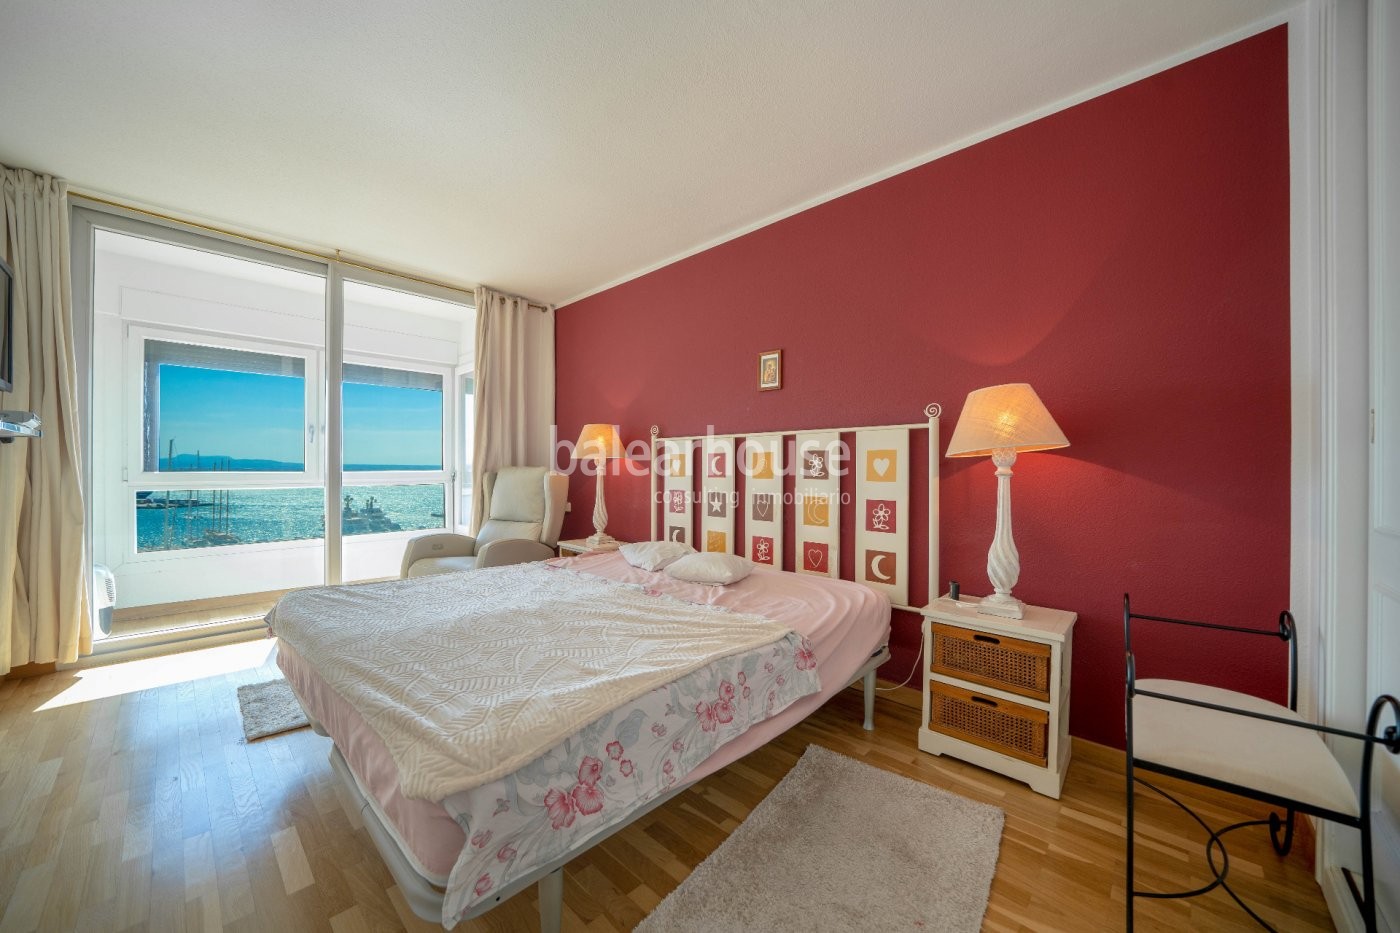 Penthouse in Paseo Marítimo with spectacular views of the sea, the port, the city and the Cathedral.